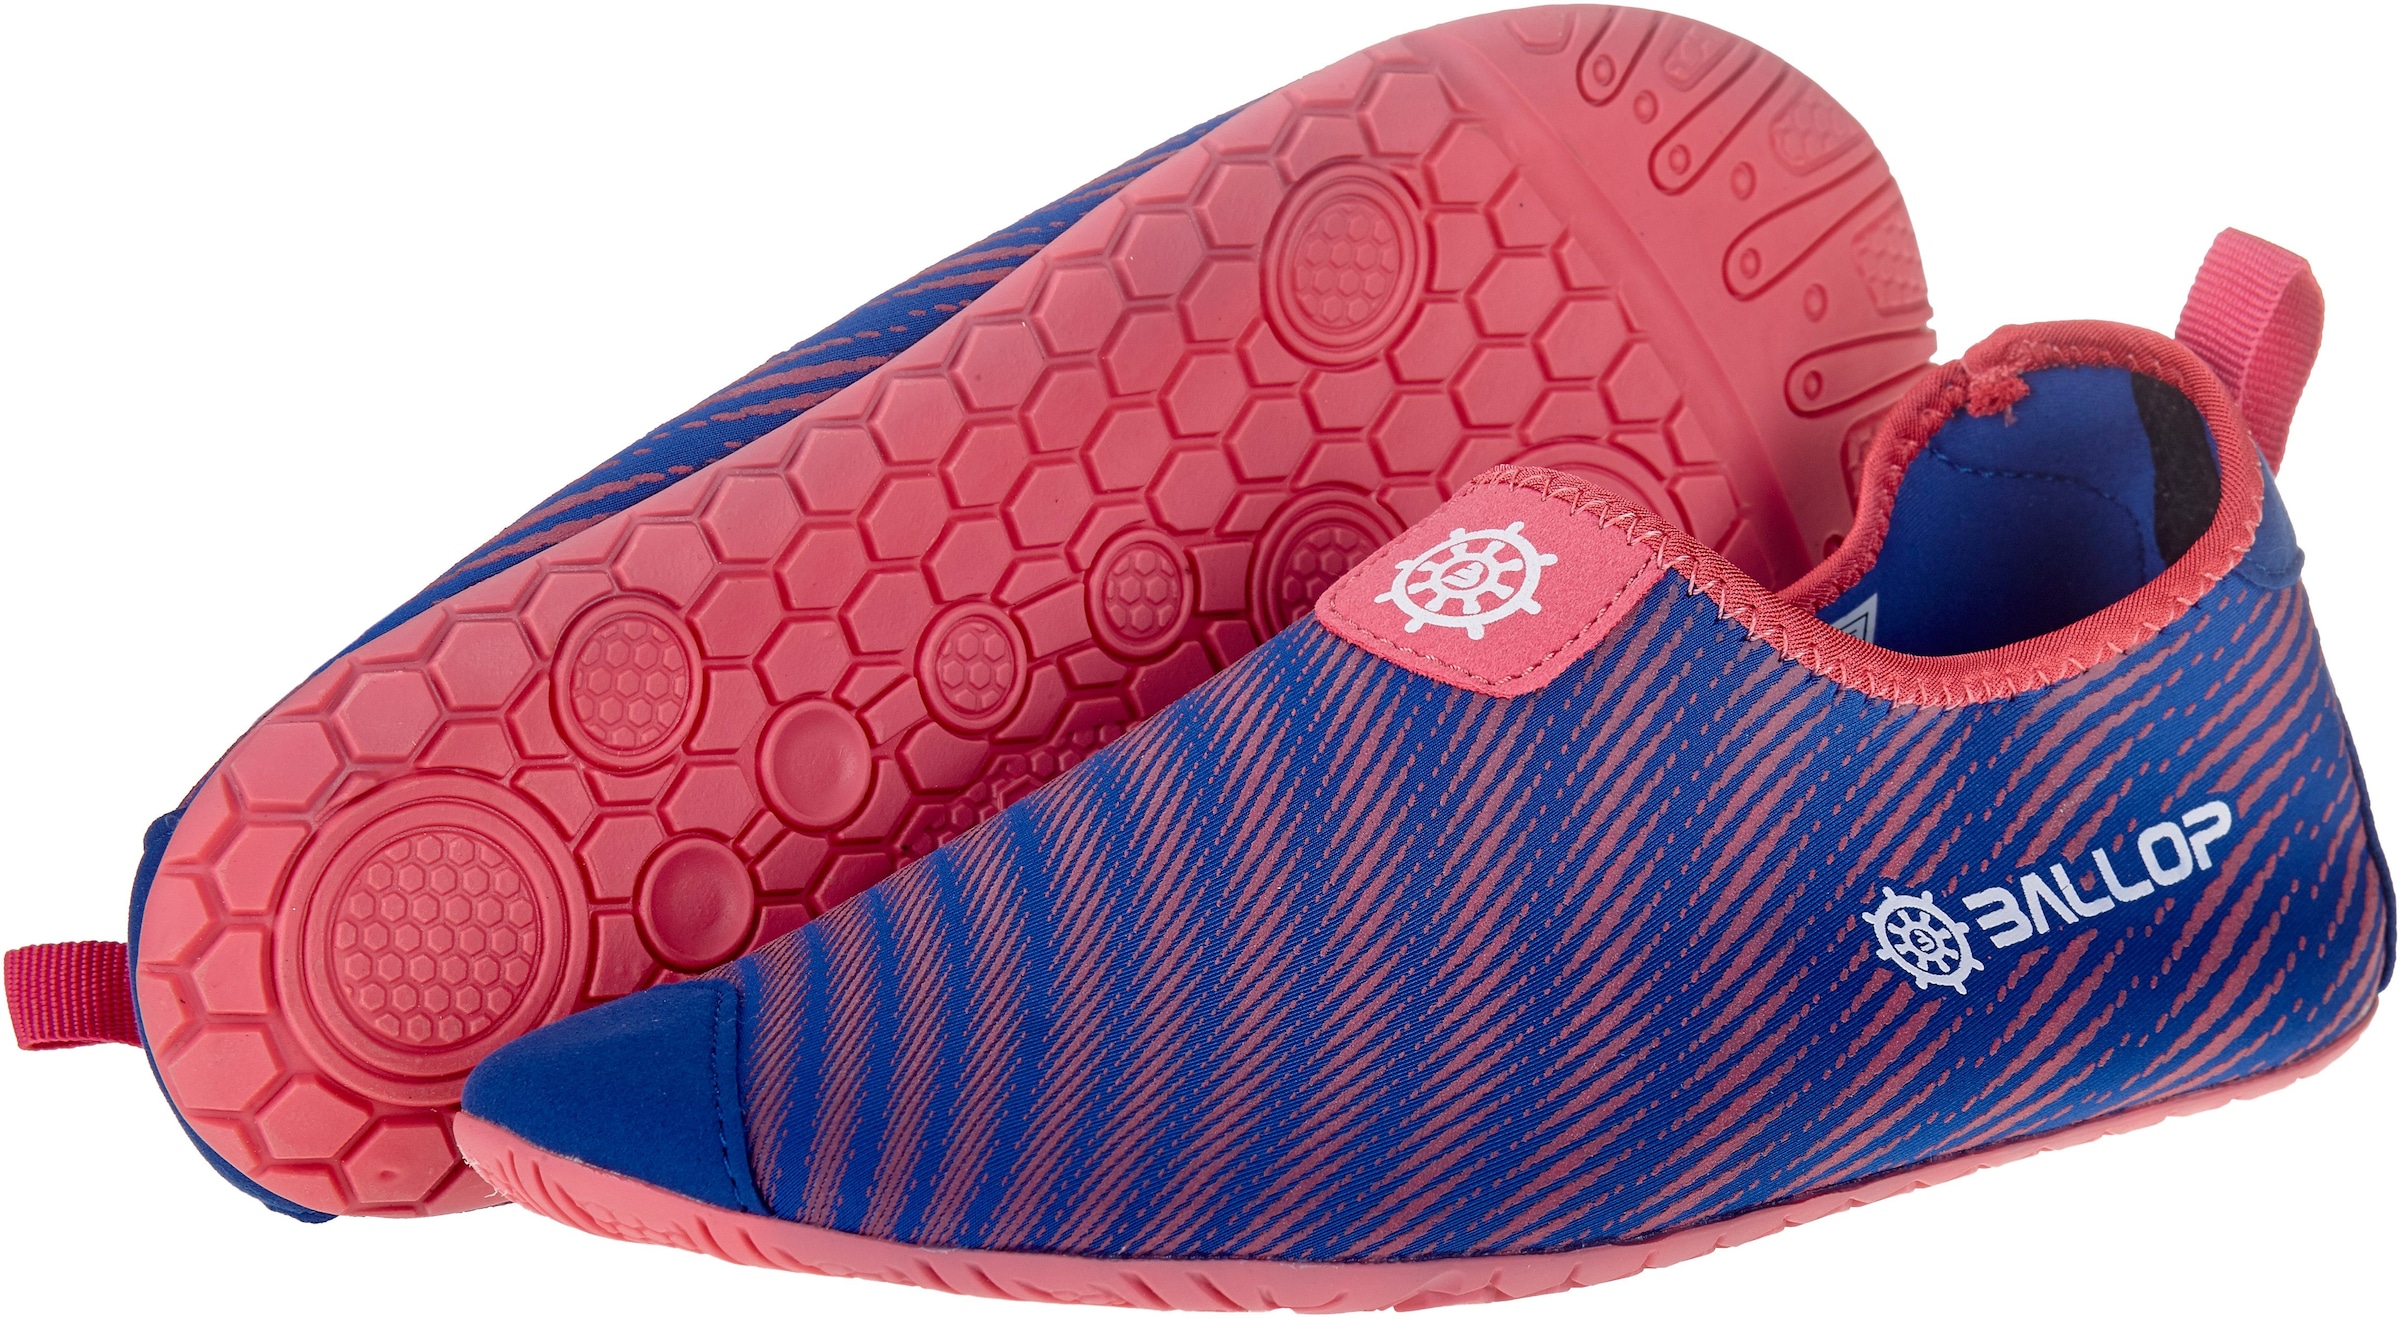 Ballop Outdoorschuh »Fit Ray pink«